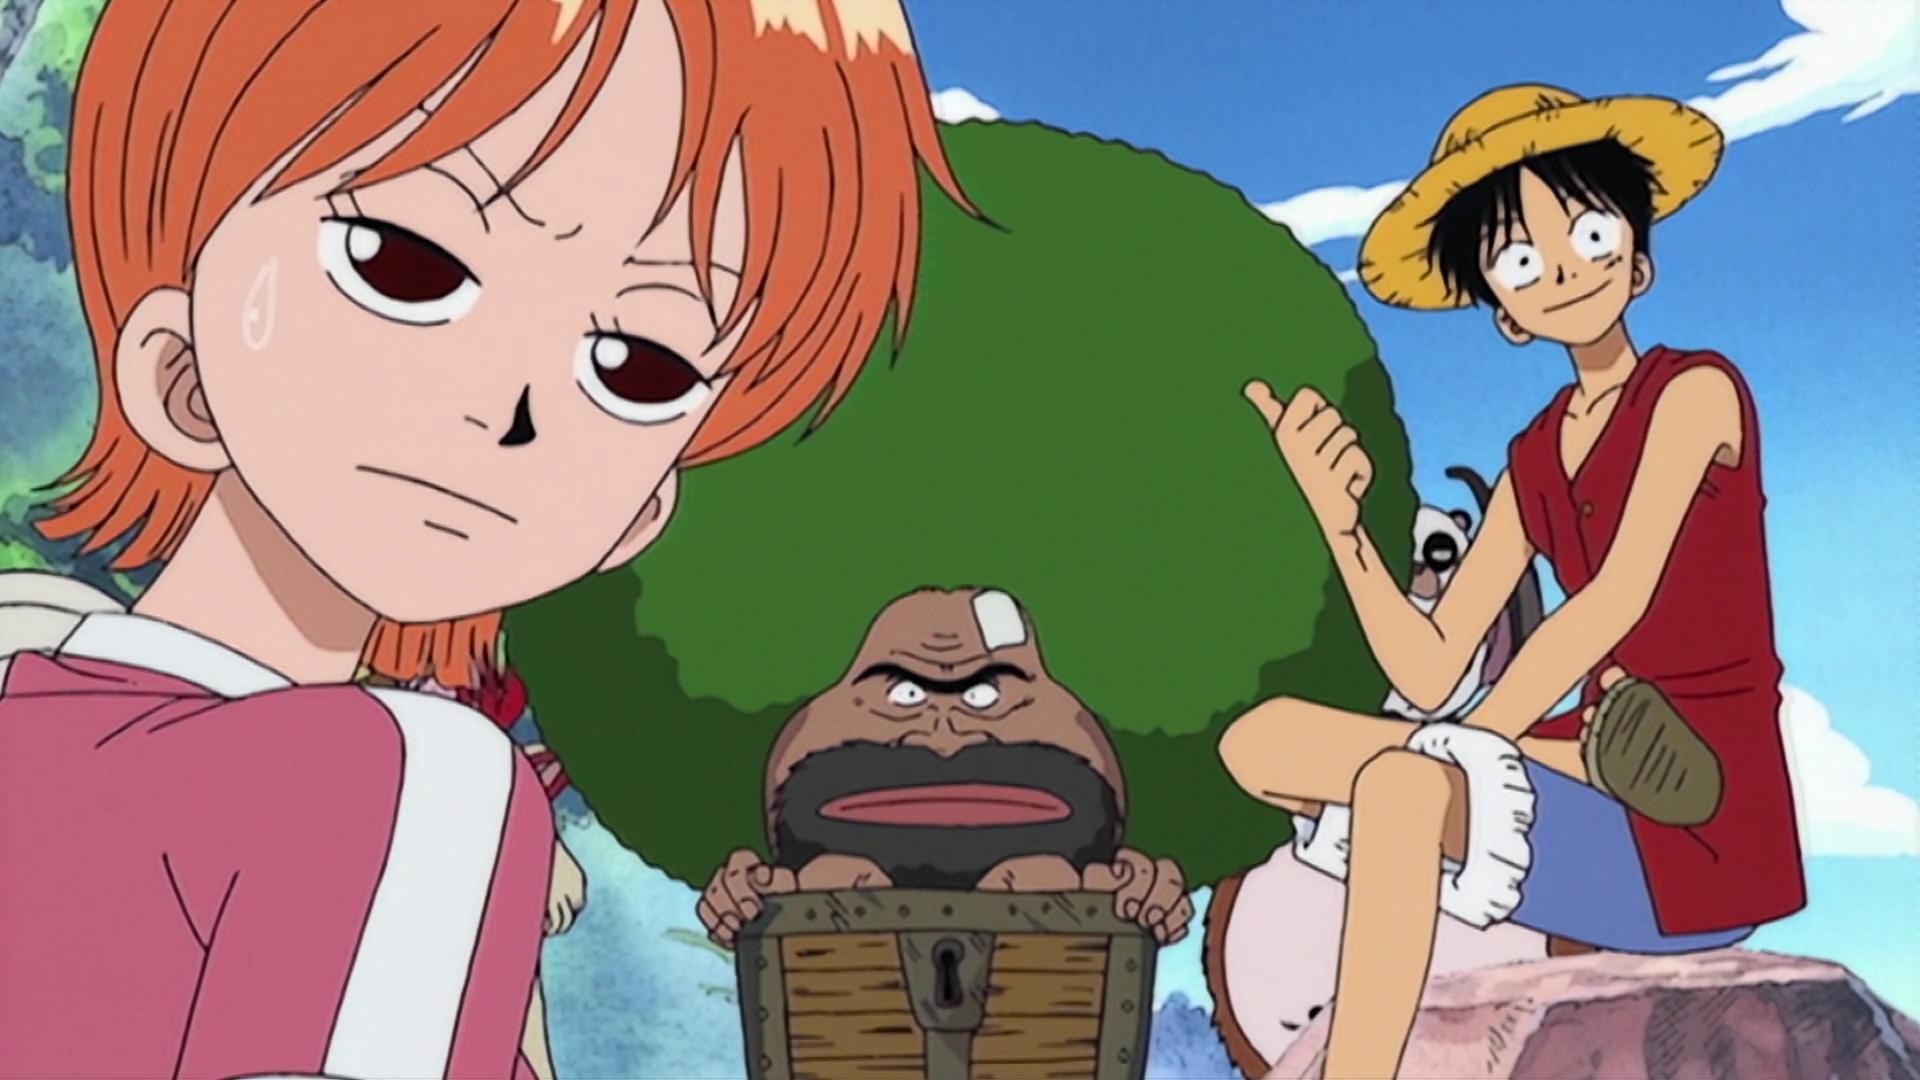 Gaimon with Nami and Luffy (Image via Toei Animation, One Piece)